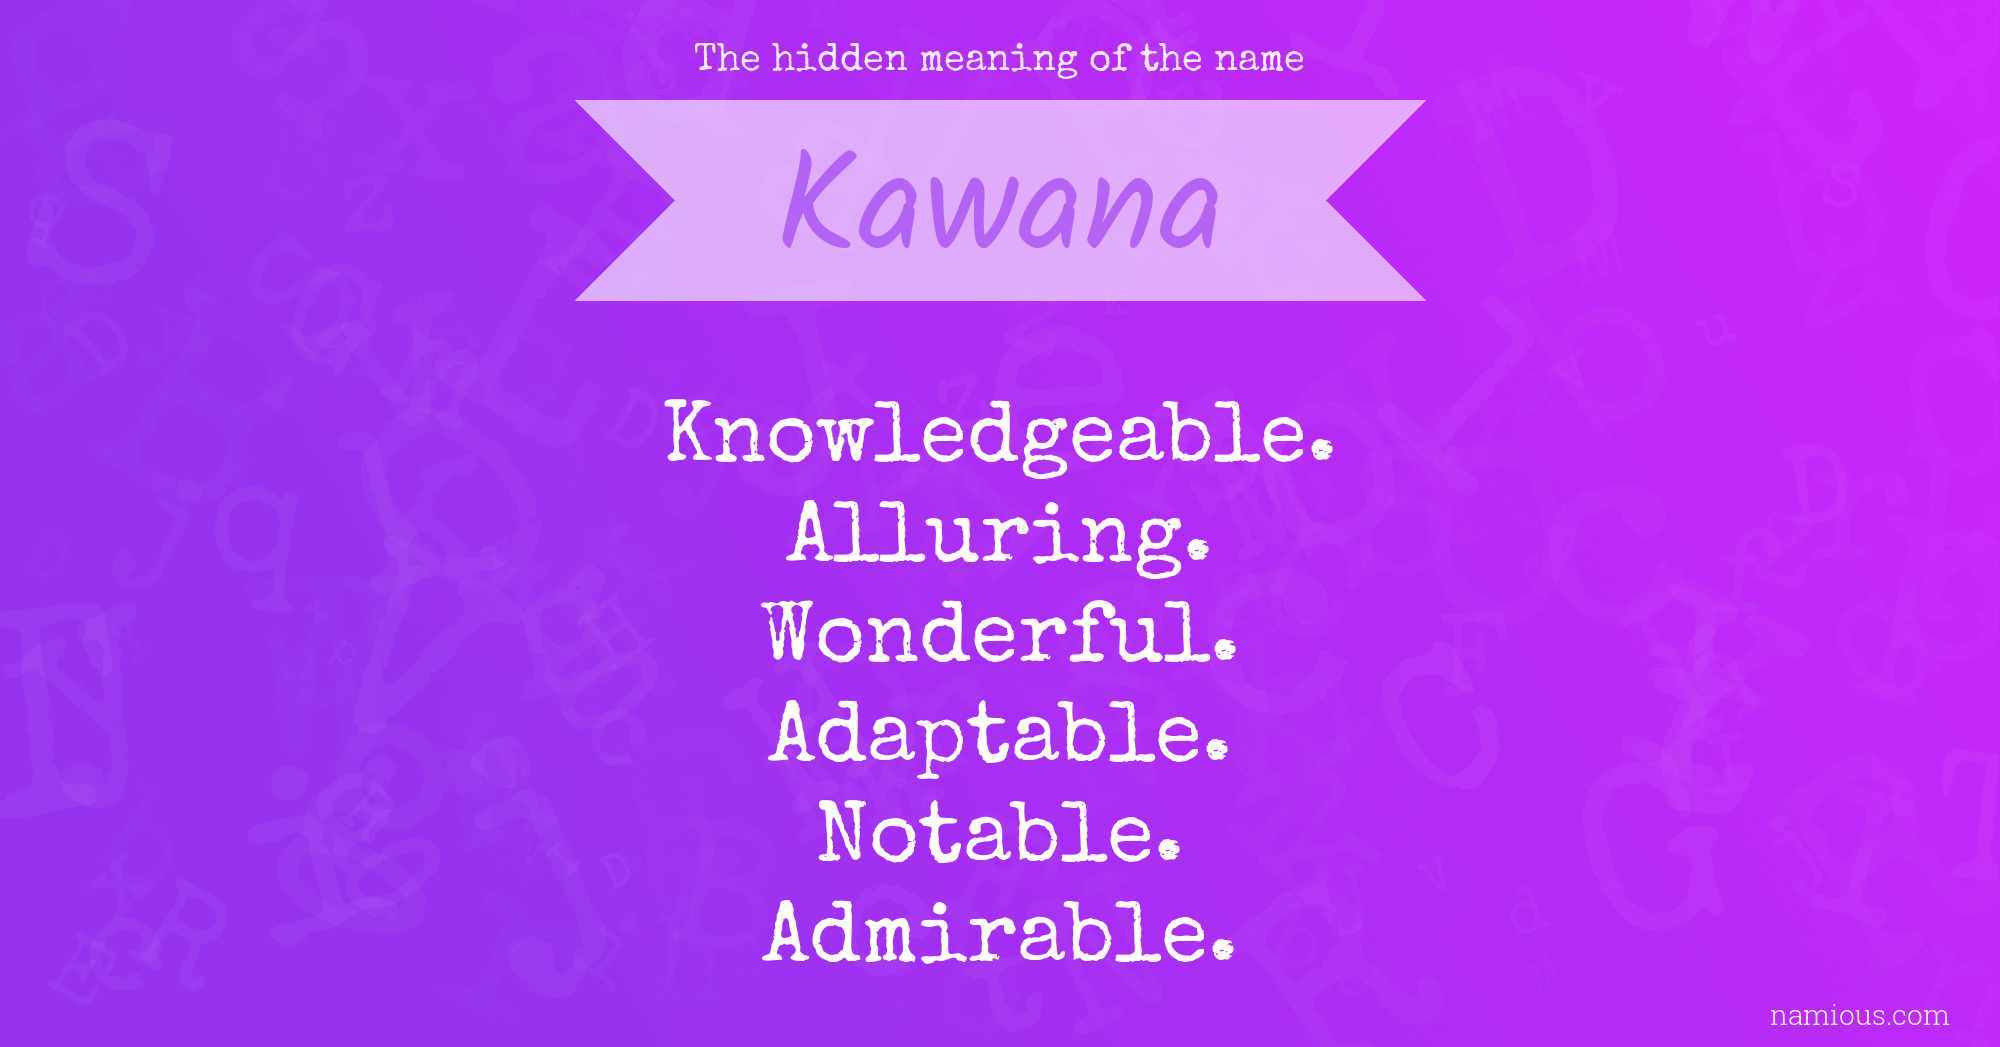 The hidden meaning of the name Kawana